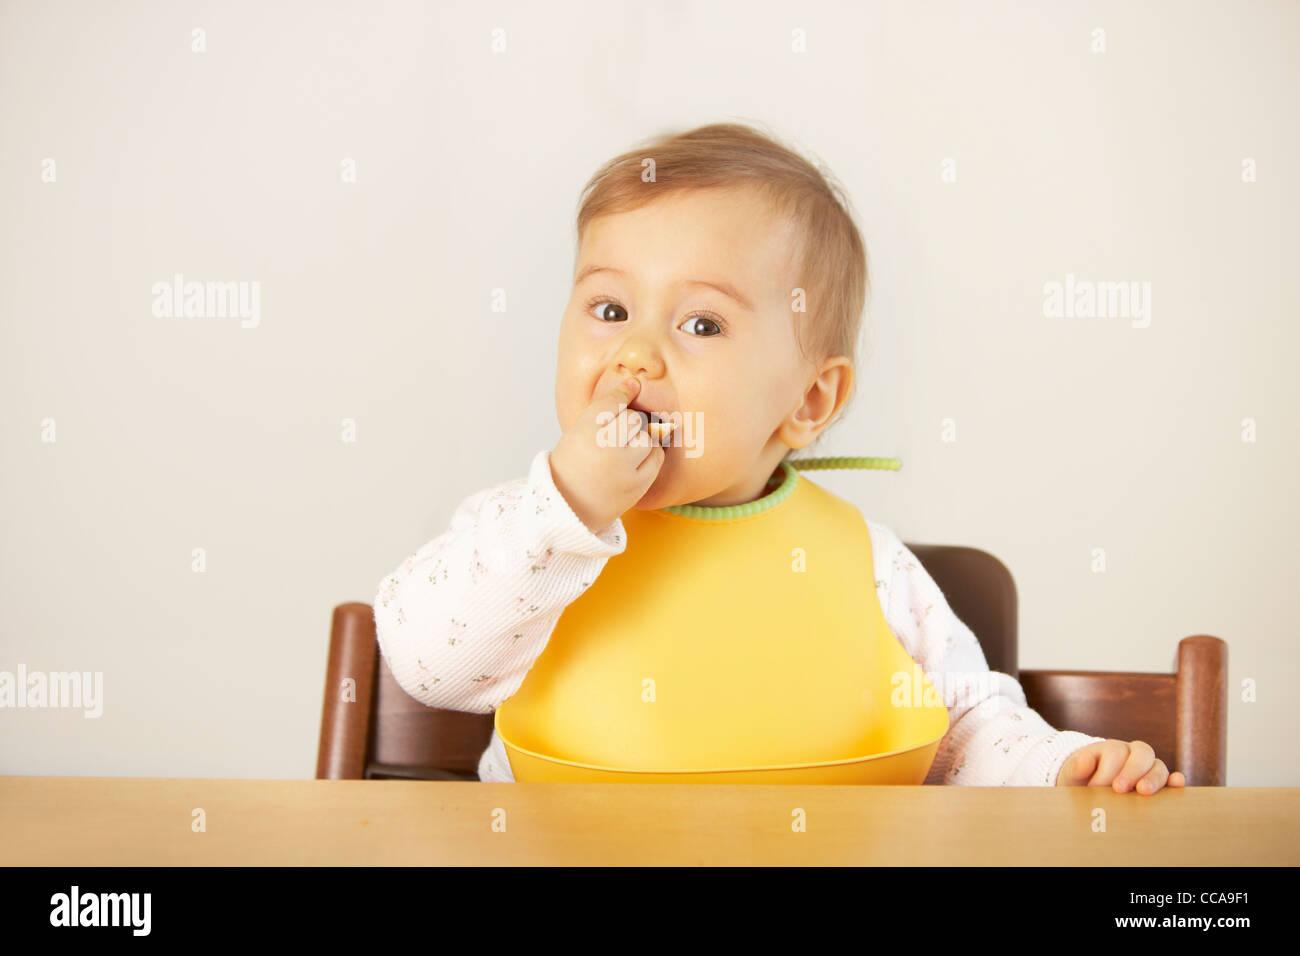 Baby Girl Eating with Hand Stock Photo